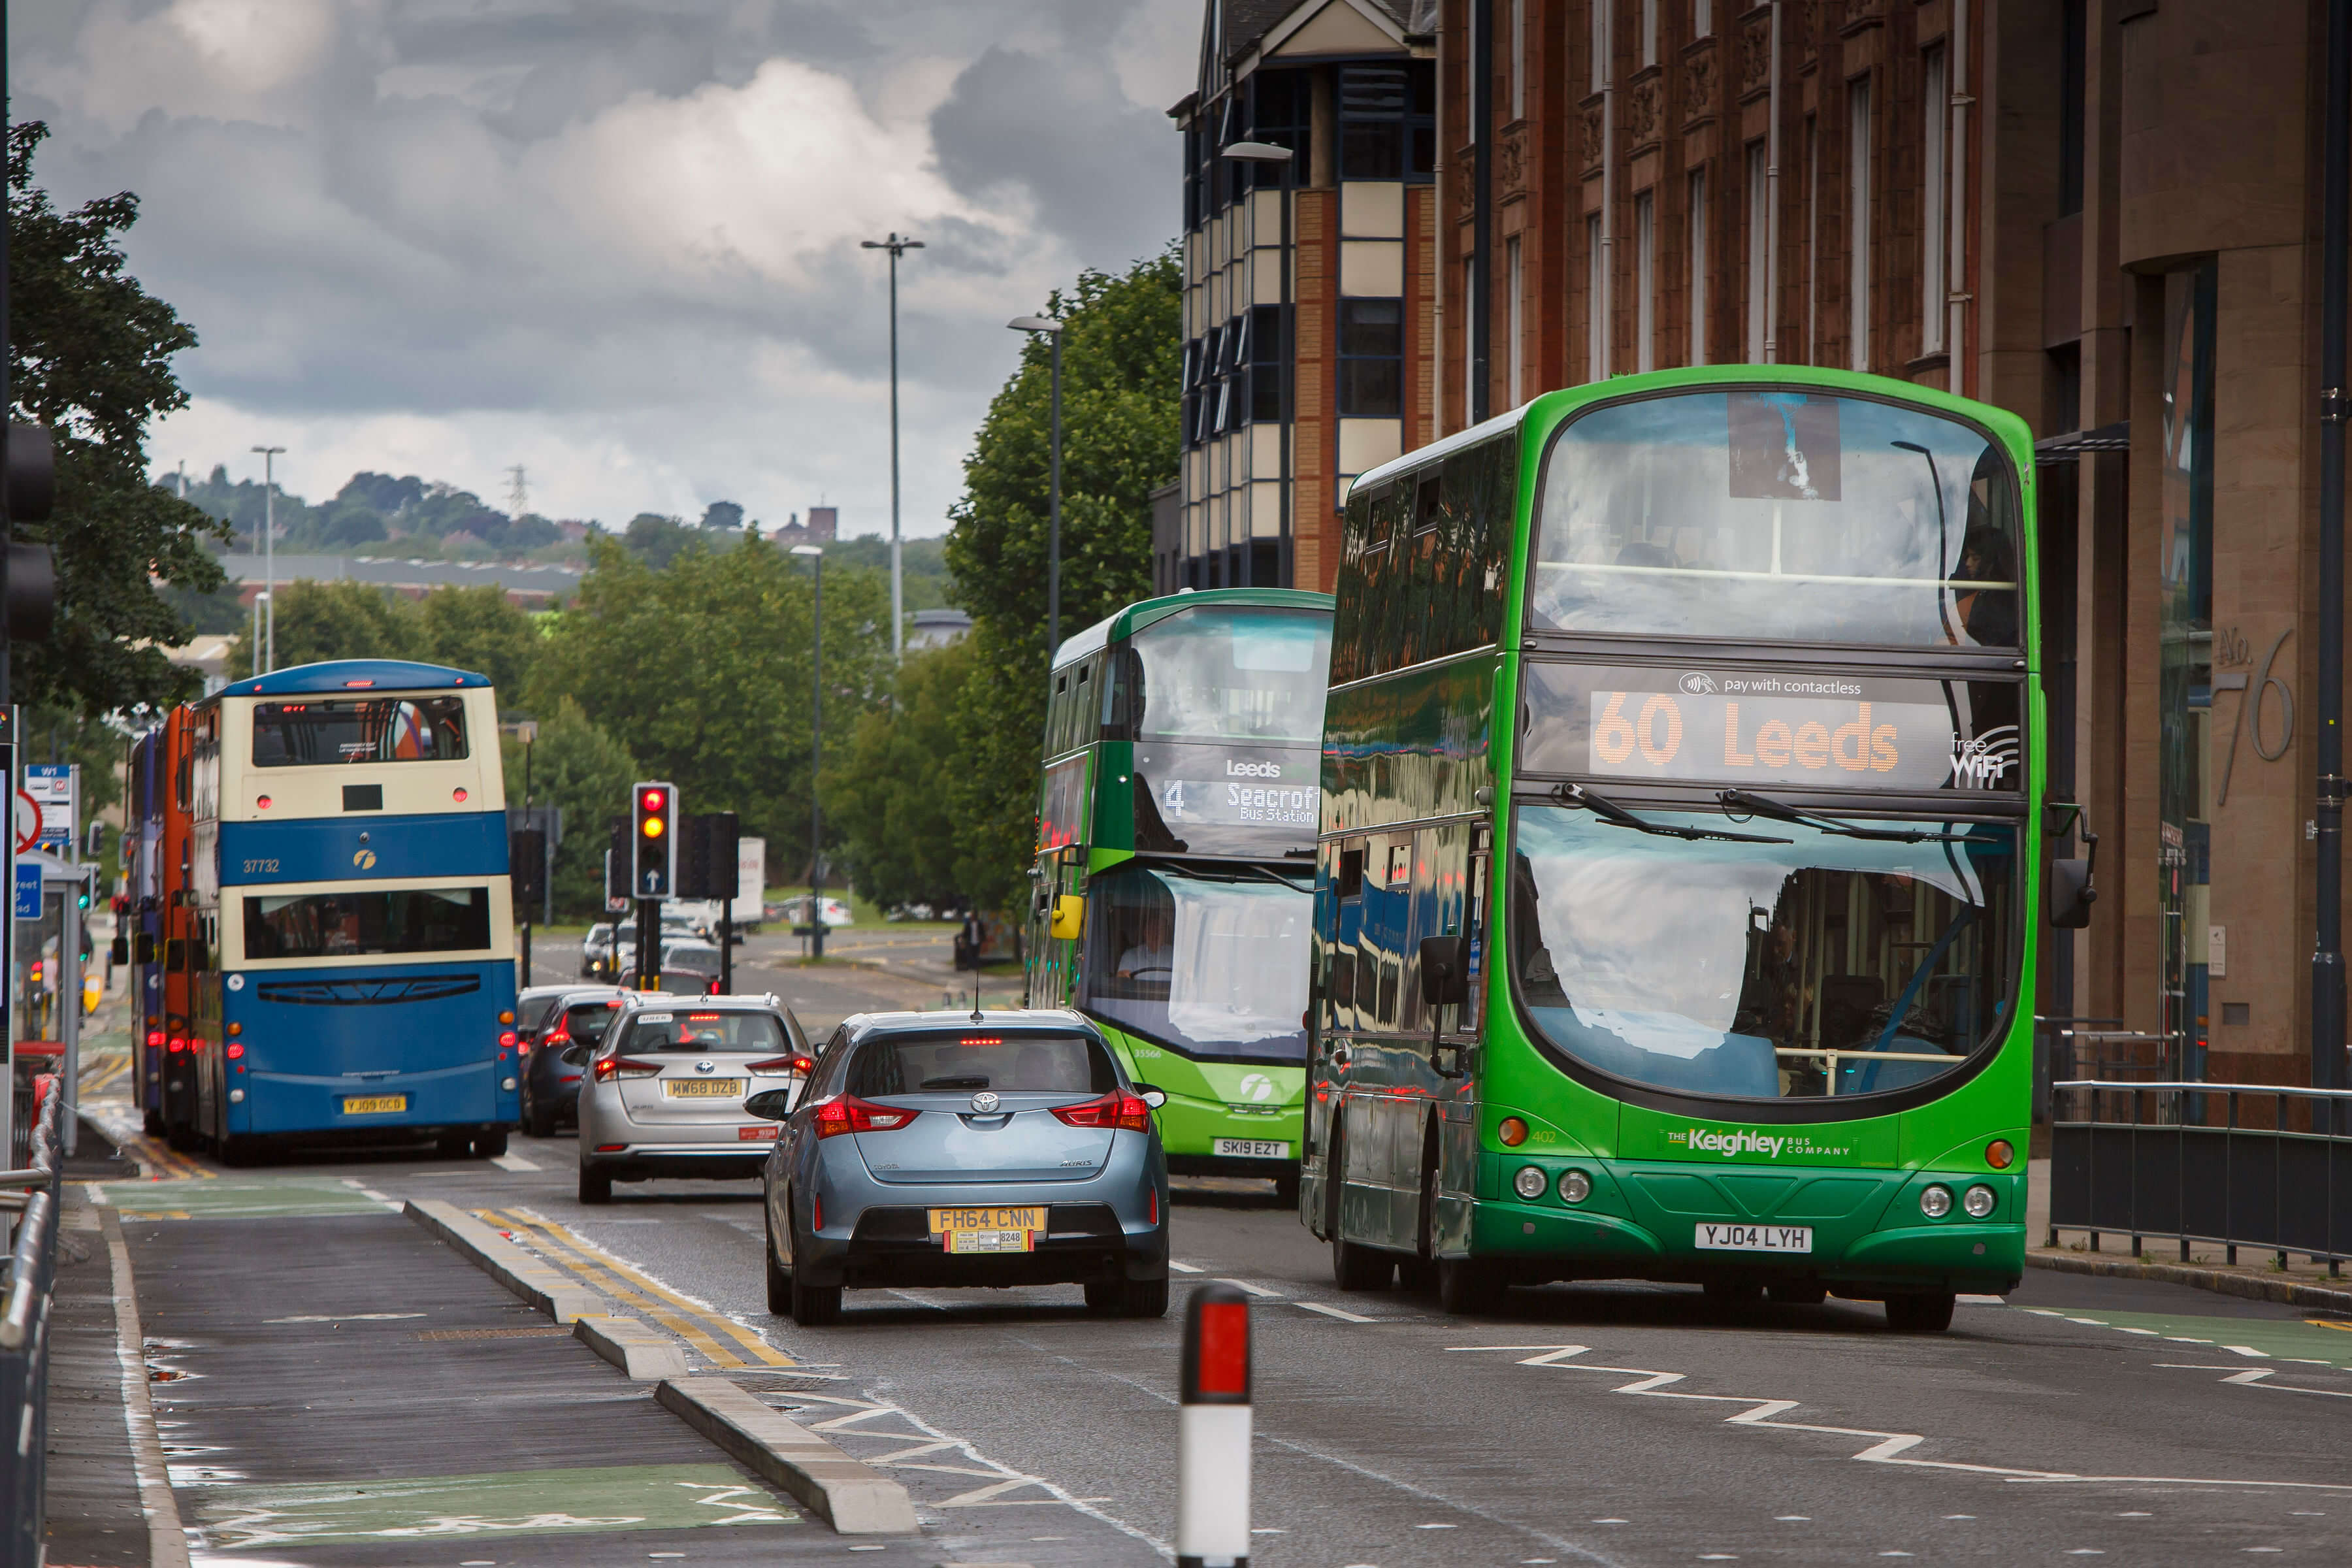 Road in Leeds with buses and cars